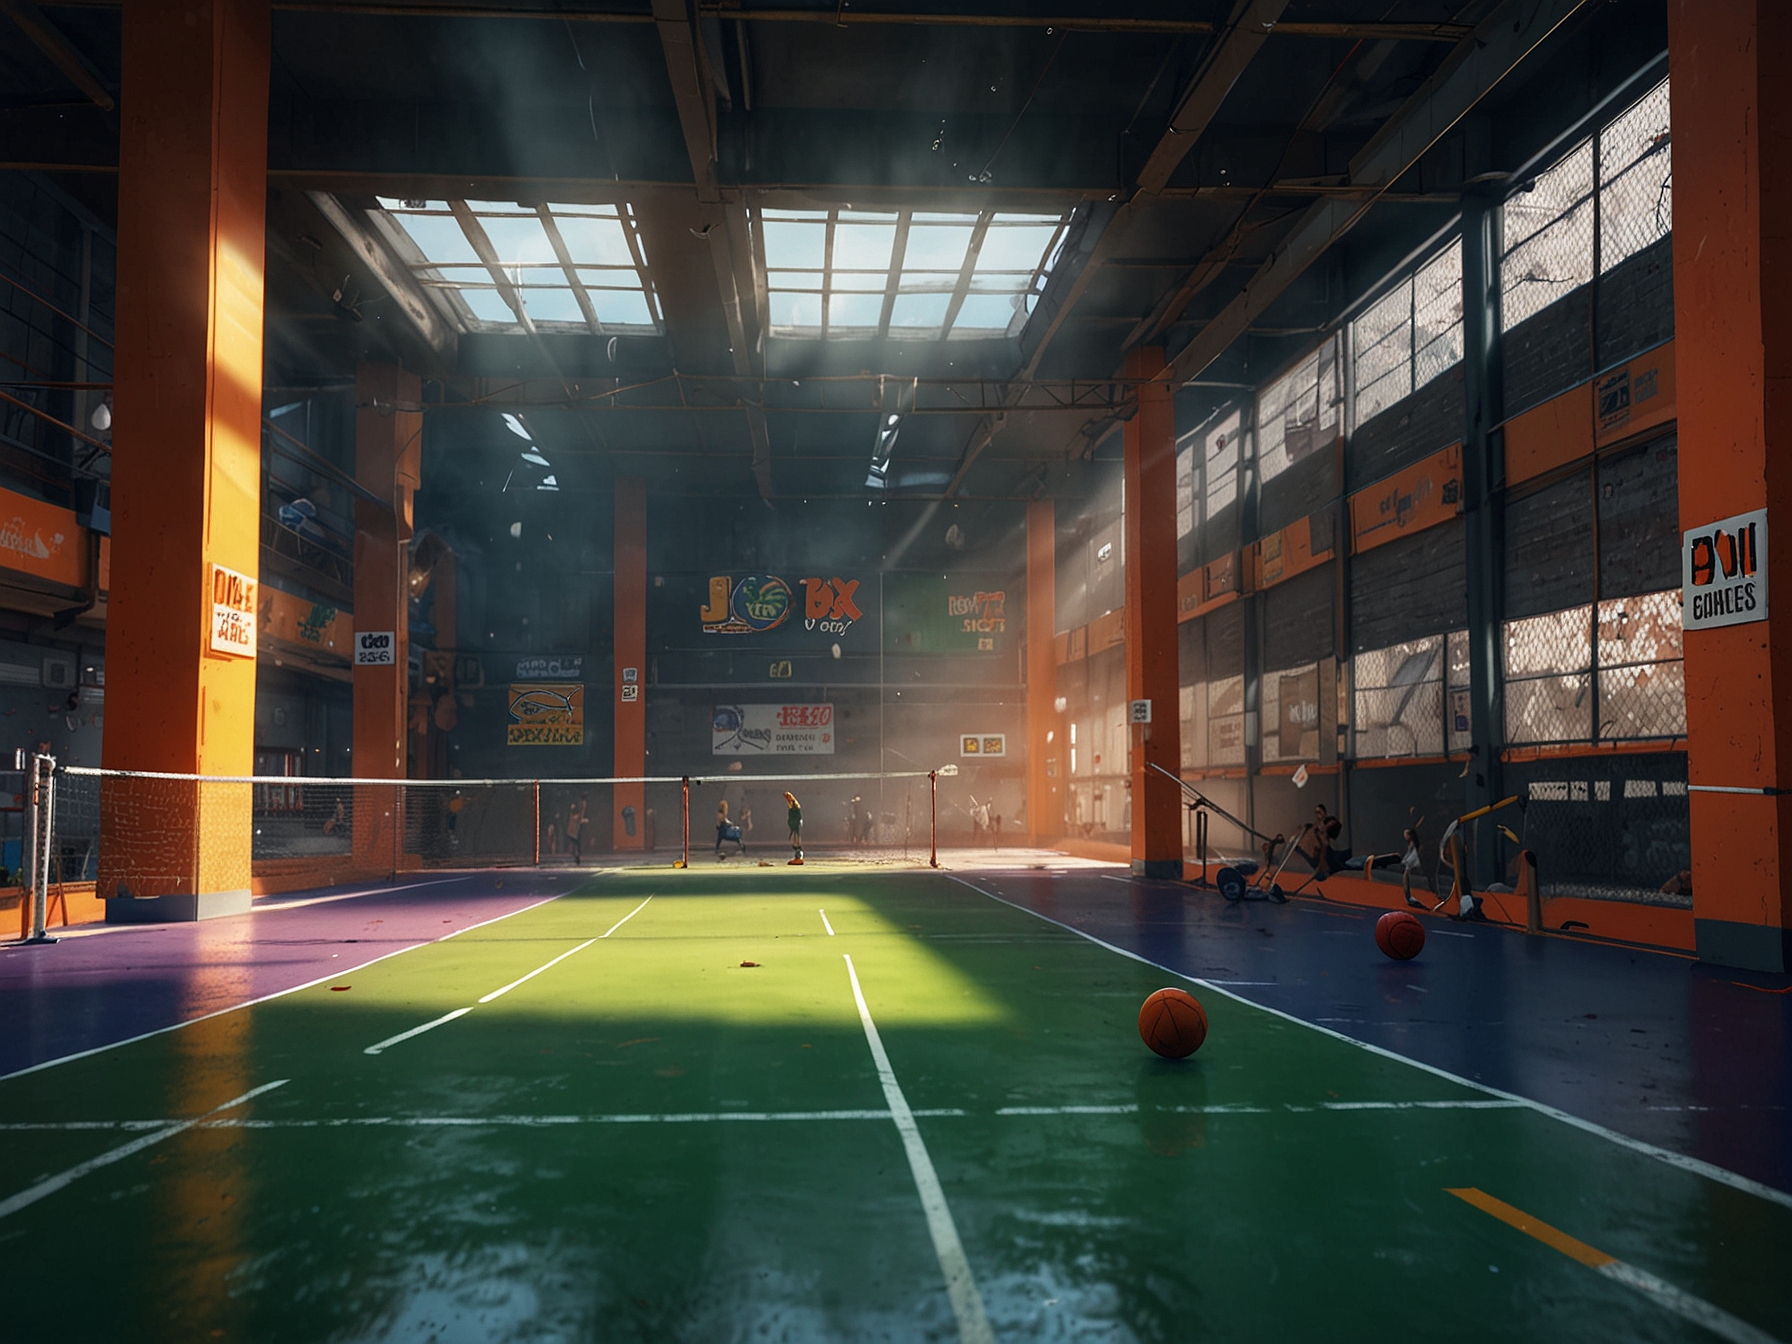 An illustration of Jomboy Media's 'Warehouse Games' showcasing vibrant gameplay of blitzball, with dynamic player movements and colorful sports equipment in an indoor sports arena setting.